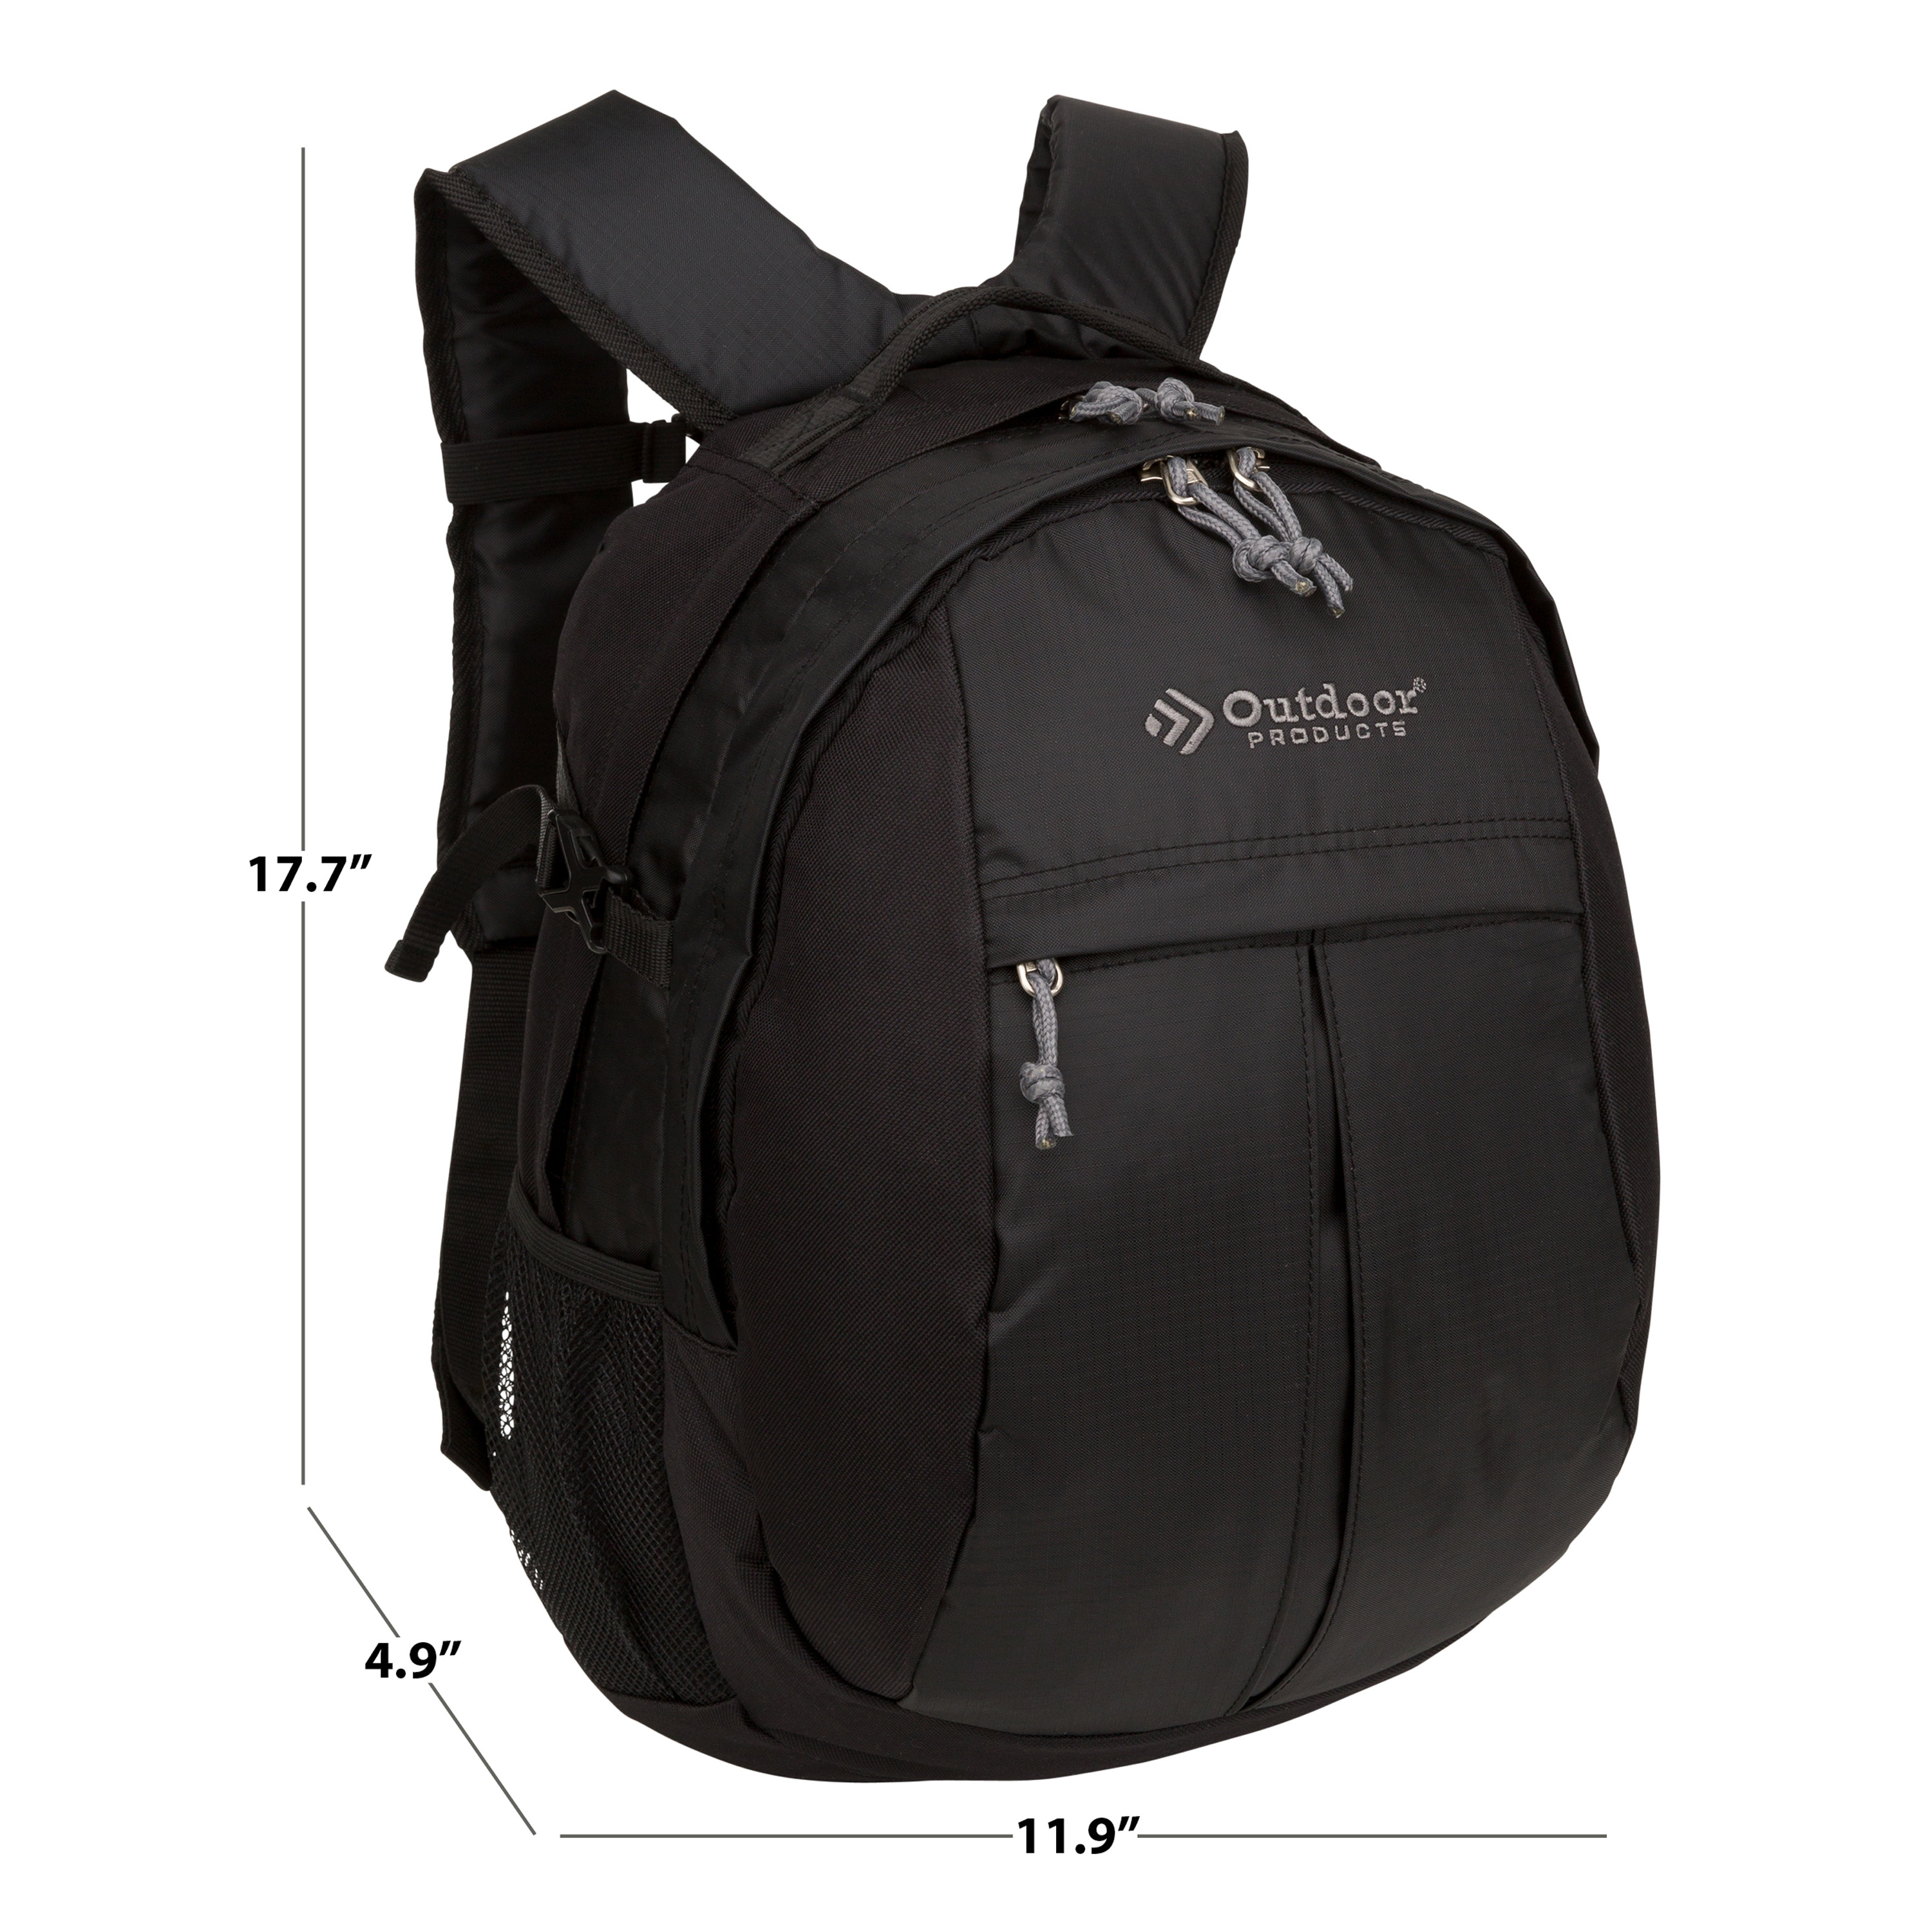 Outdoor Products 25 Ltr Traverse Backpack, Black, Unisex, Adult, Teen, Polyester - image 4 of 15